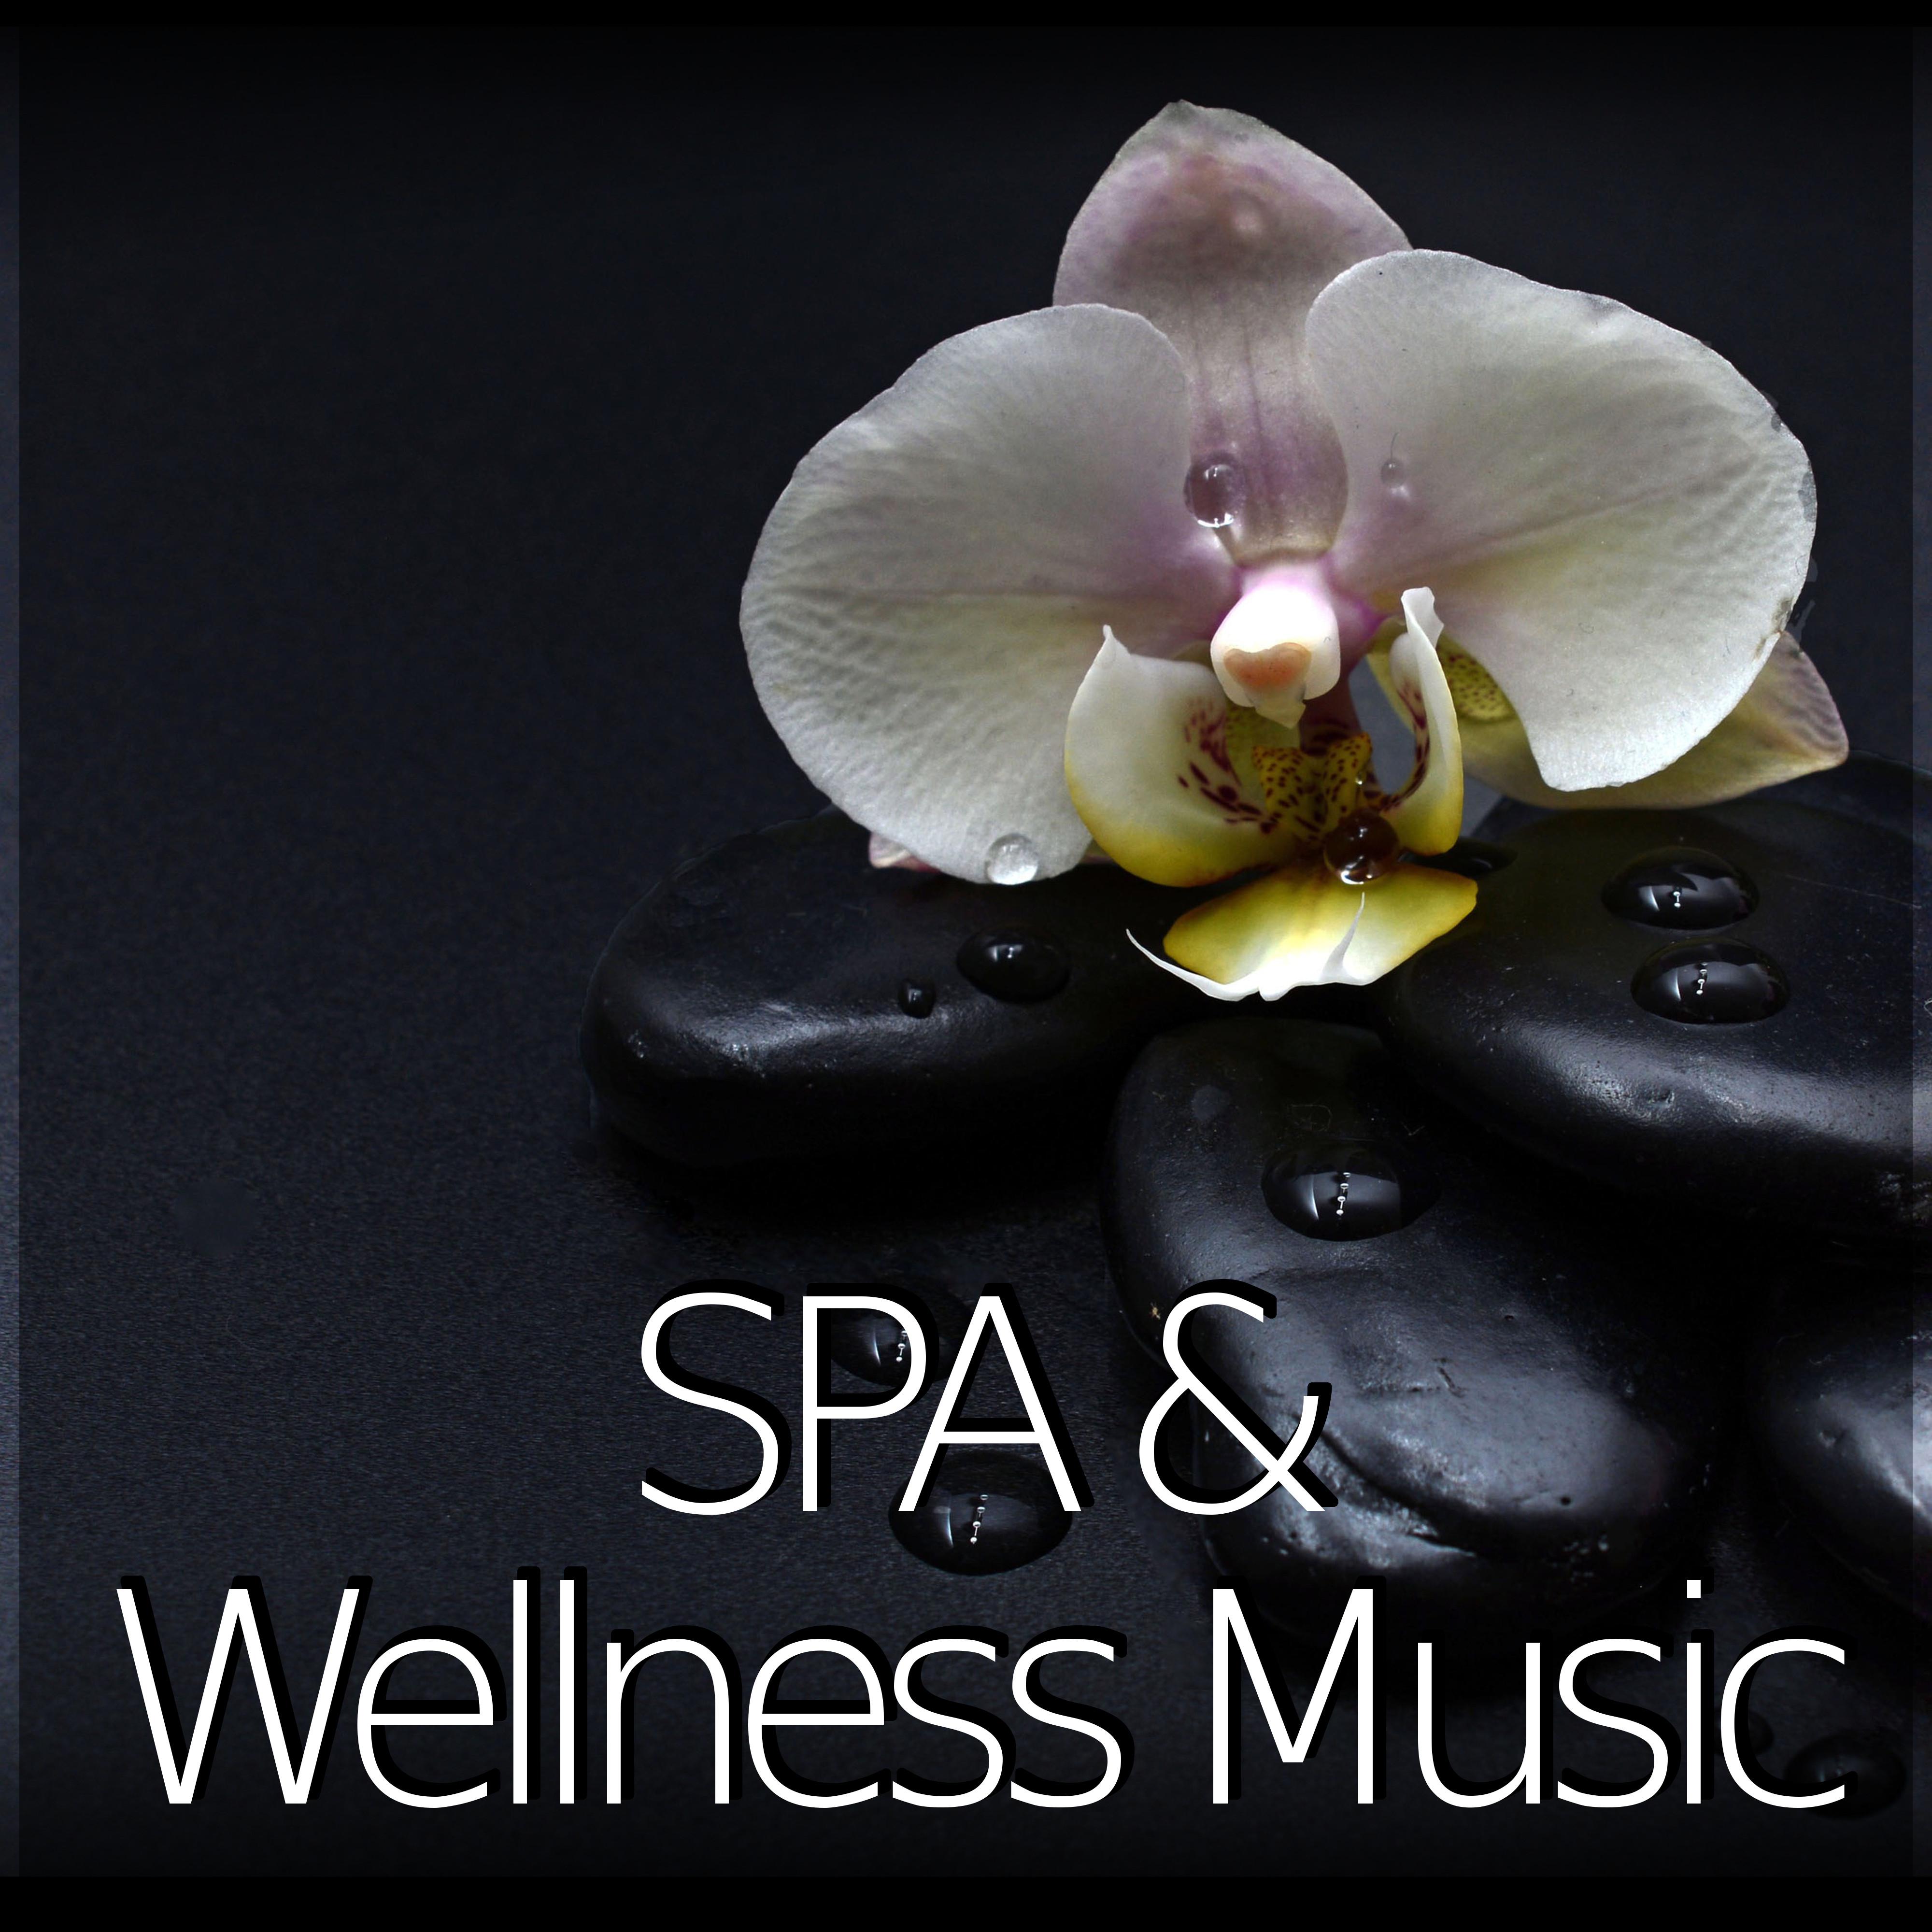 SPA & Wellness Music – Spirytual and Smooth Background Music with Nature Sounds for Beauty Therapy, Shiatsu and Aromatherapy, Healing by Touch, Mindfulness Meditation and Relaxation